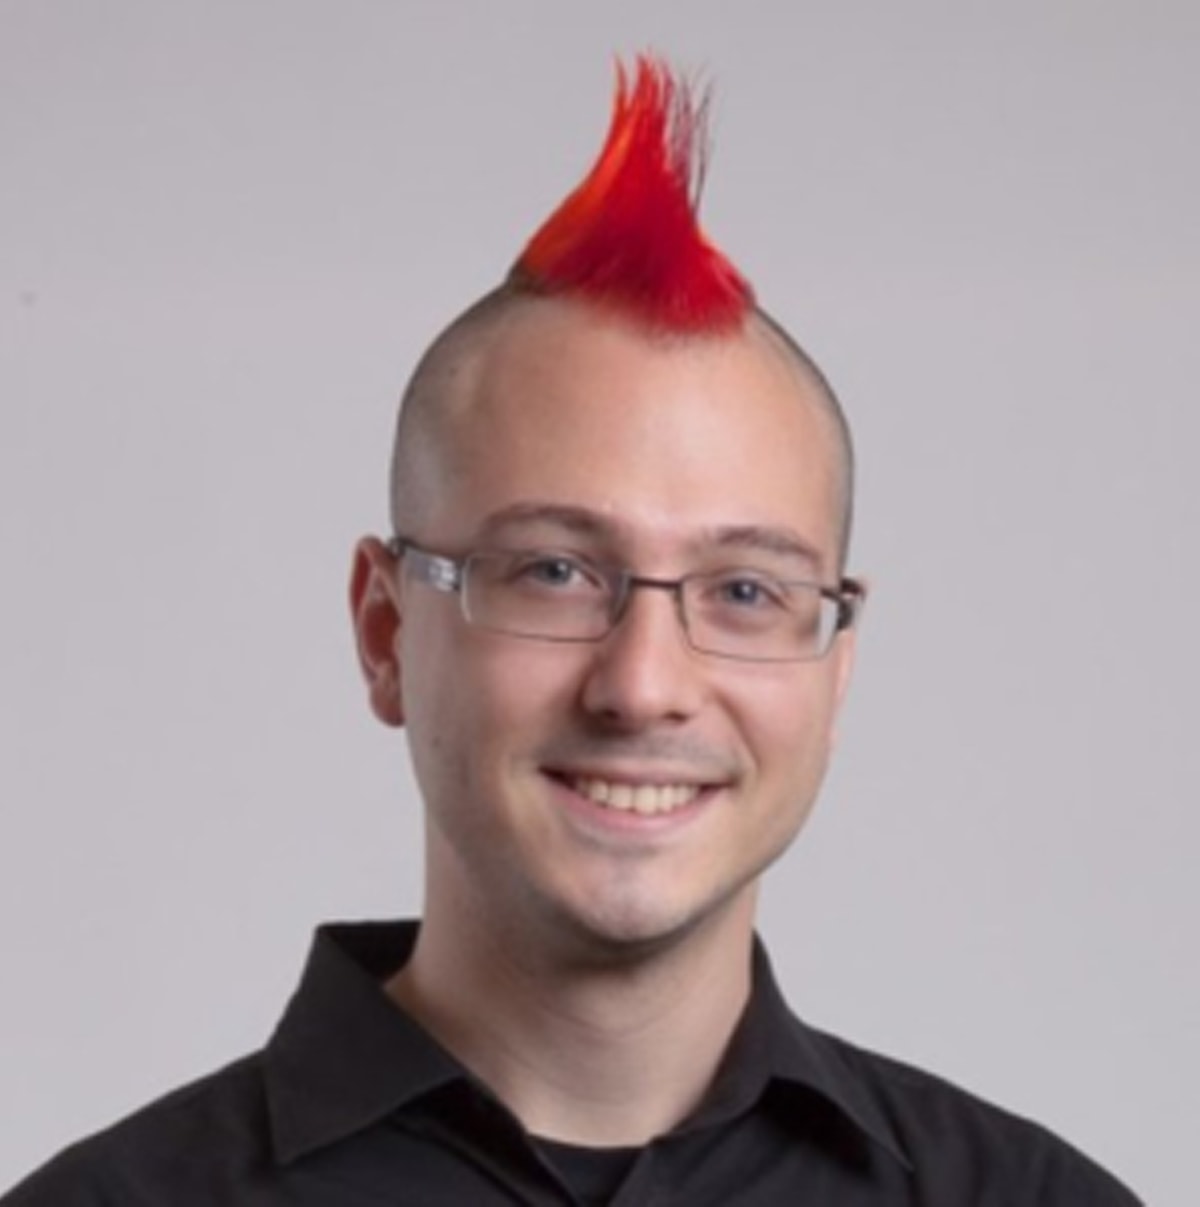 Headshot of a smiling Mikhail Davidof, who has a red mohawk hairstyle